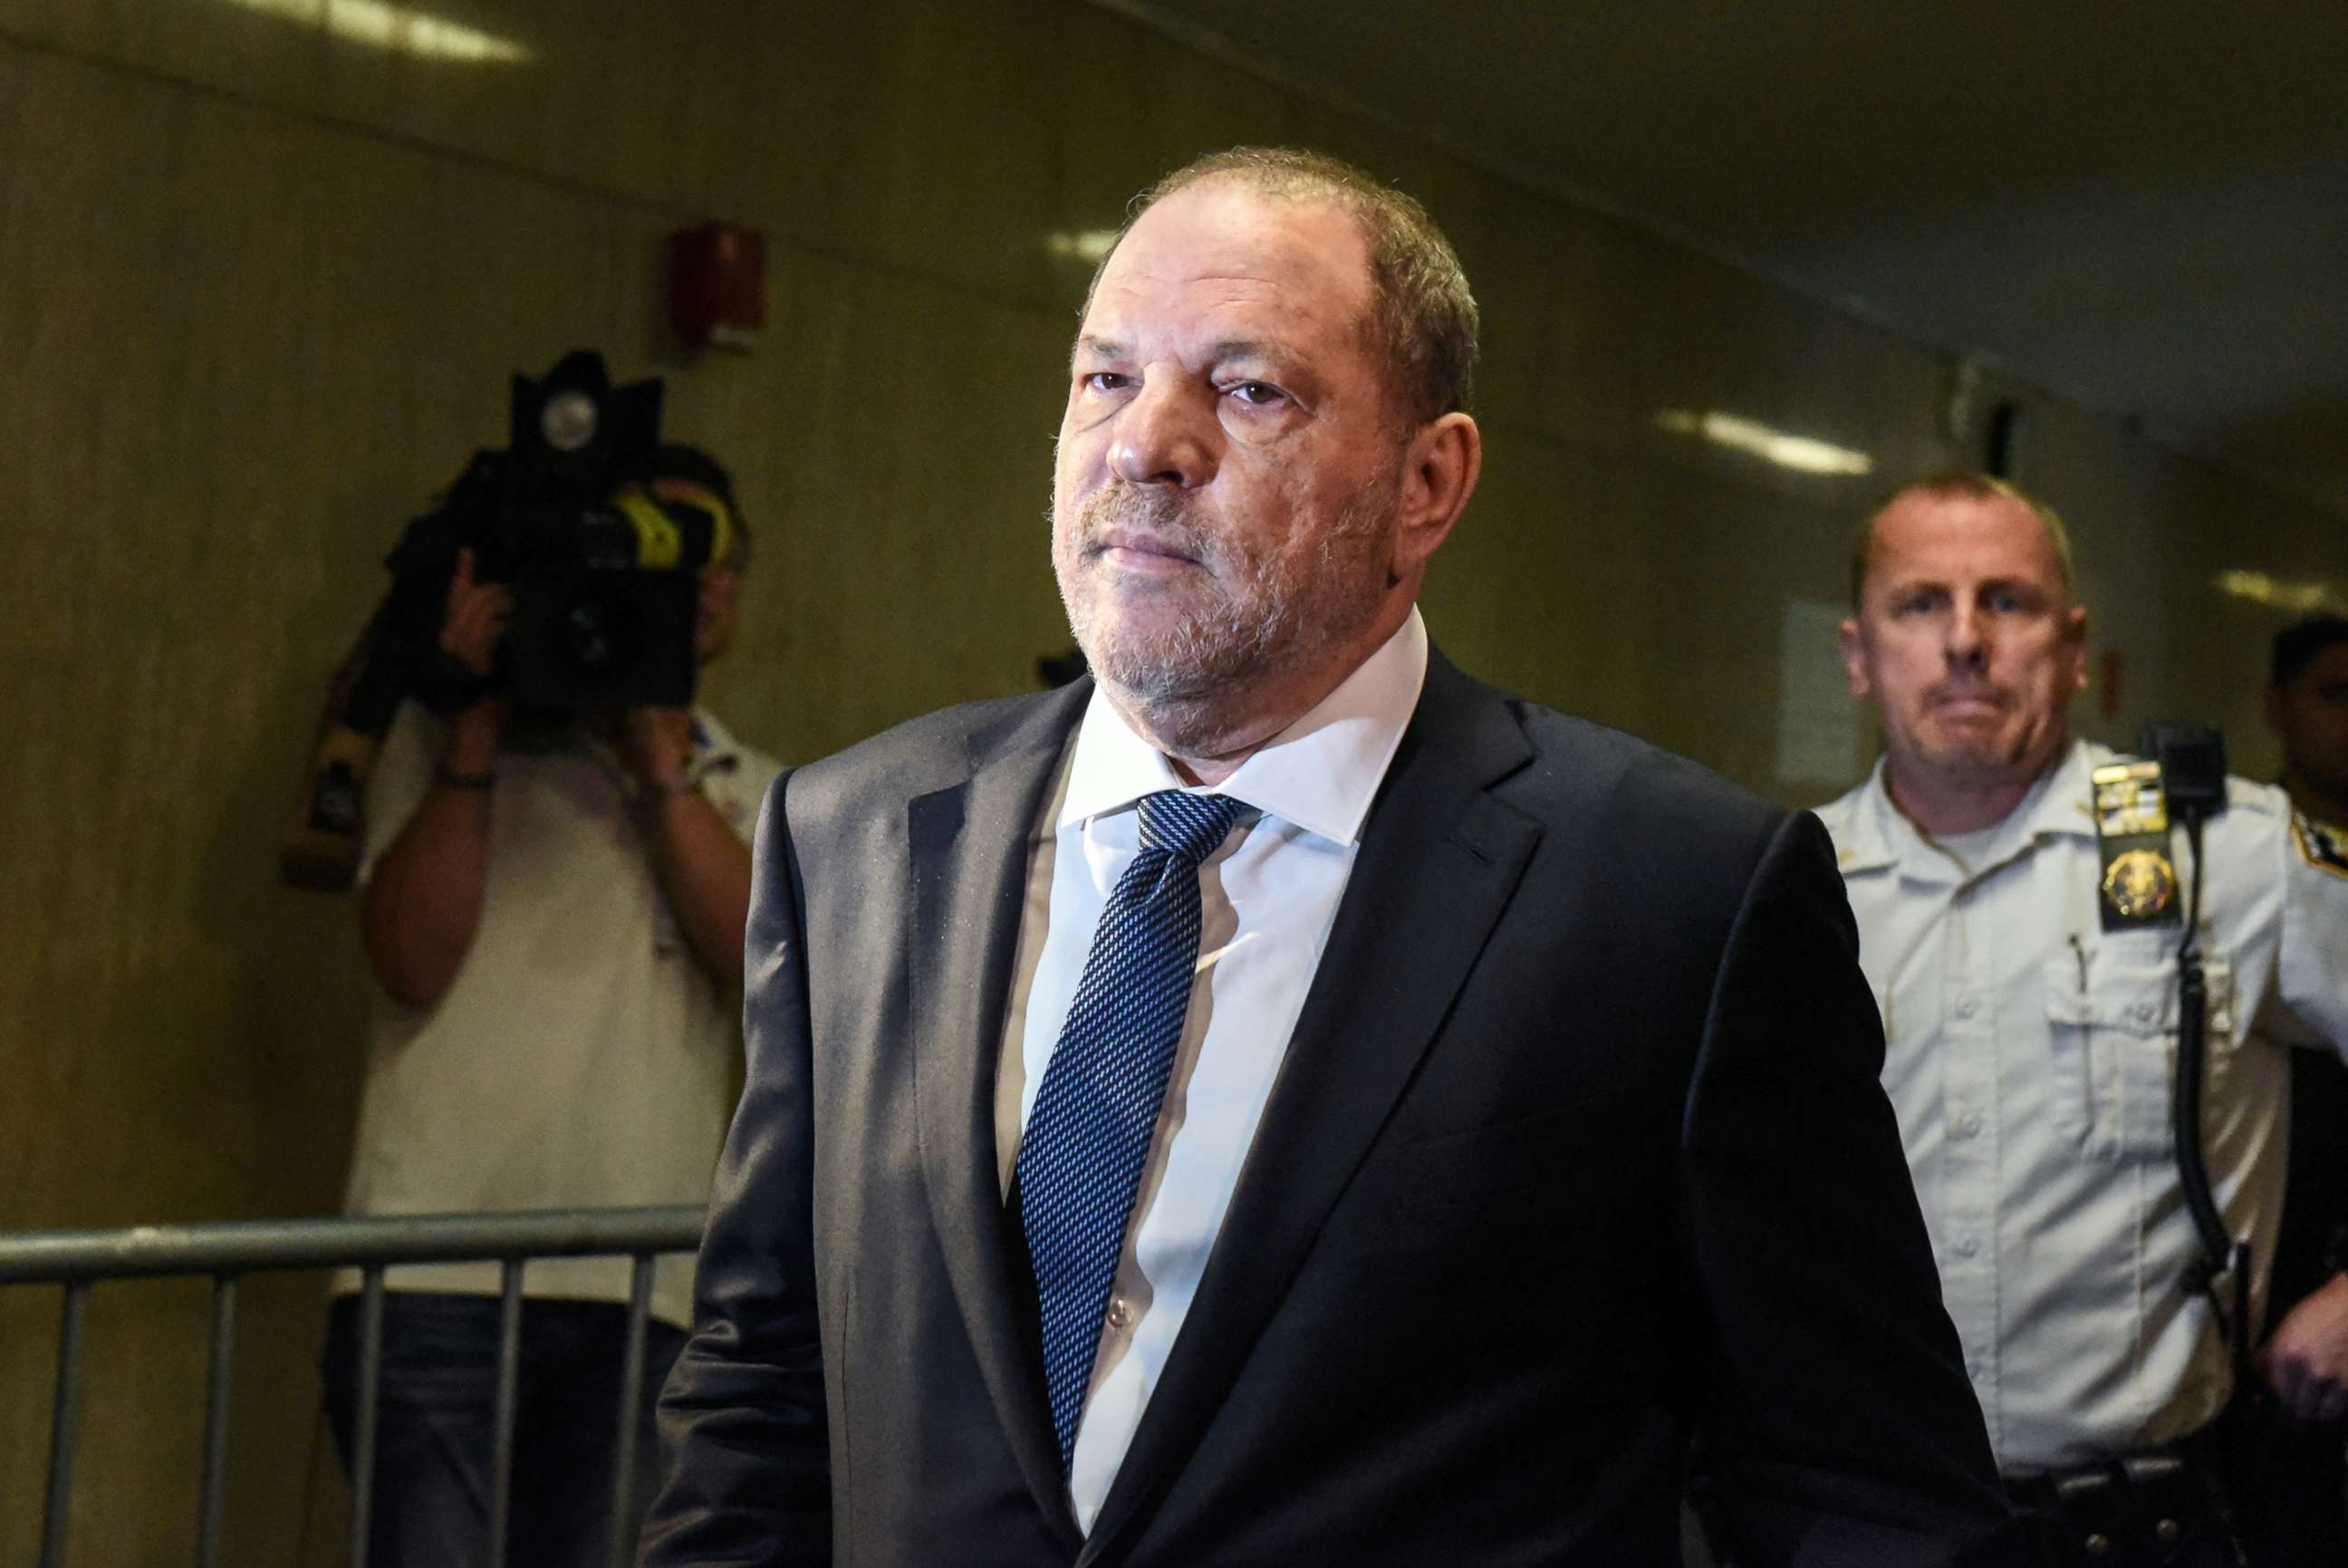 PHOTO: Harvey Weinstein arrives at the New York State Supreme Court, Oct. 11, 2018 in N.Y.